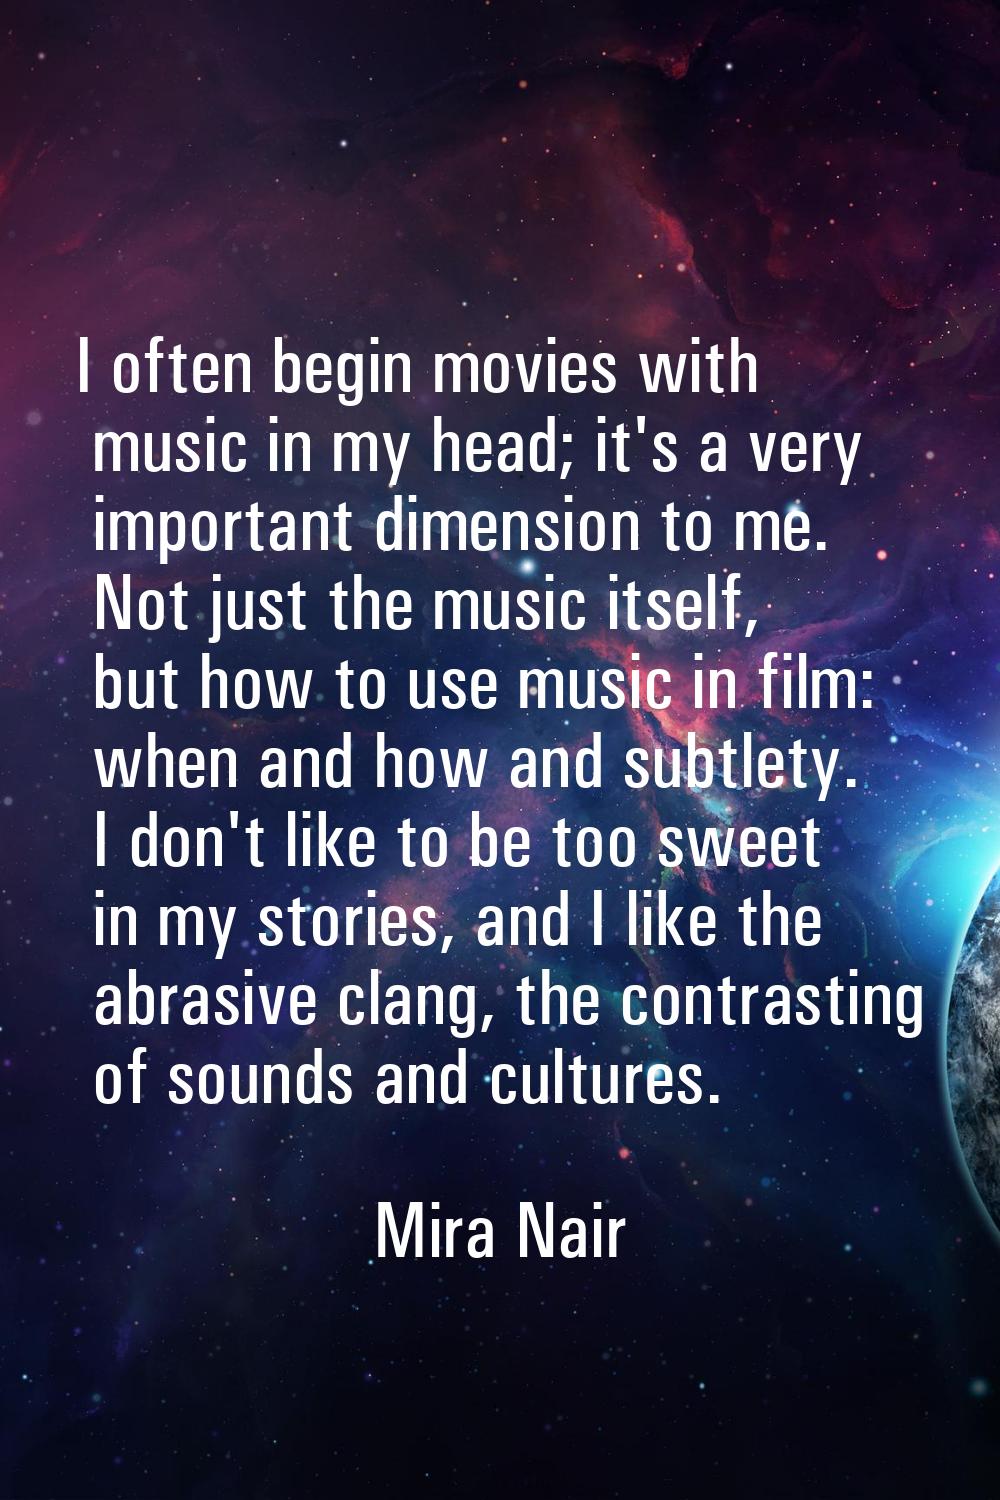 I often begin movies with music in my head; it's a very important dimension to me. Not just the mus